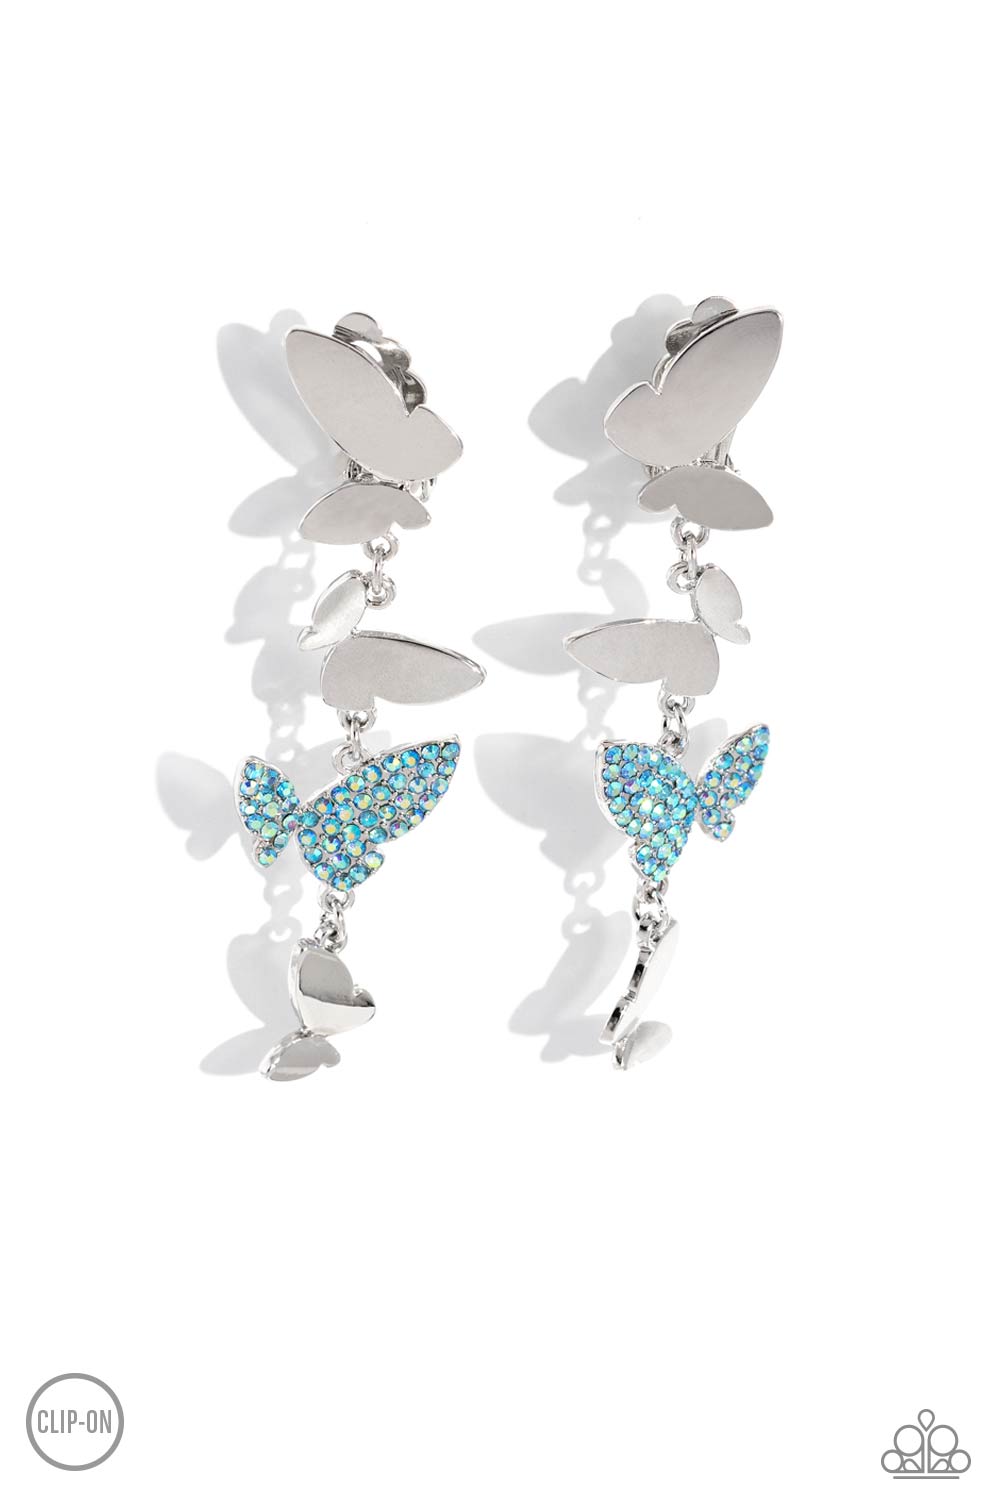 Paparazzi Accessories Flying Flashy - Blue *Clip-On Three butterflies with high-sheen silver wings and one blue iridescent-encrusted butterfly flutter down the ear, creating a free-spirited lure. Each butterfly swings in whimsical asymmetry, creating the